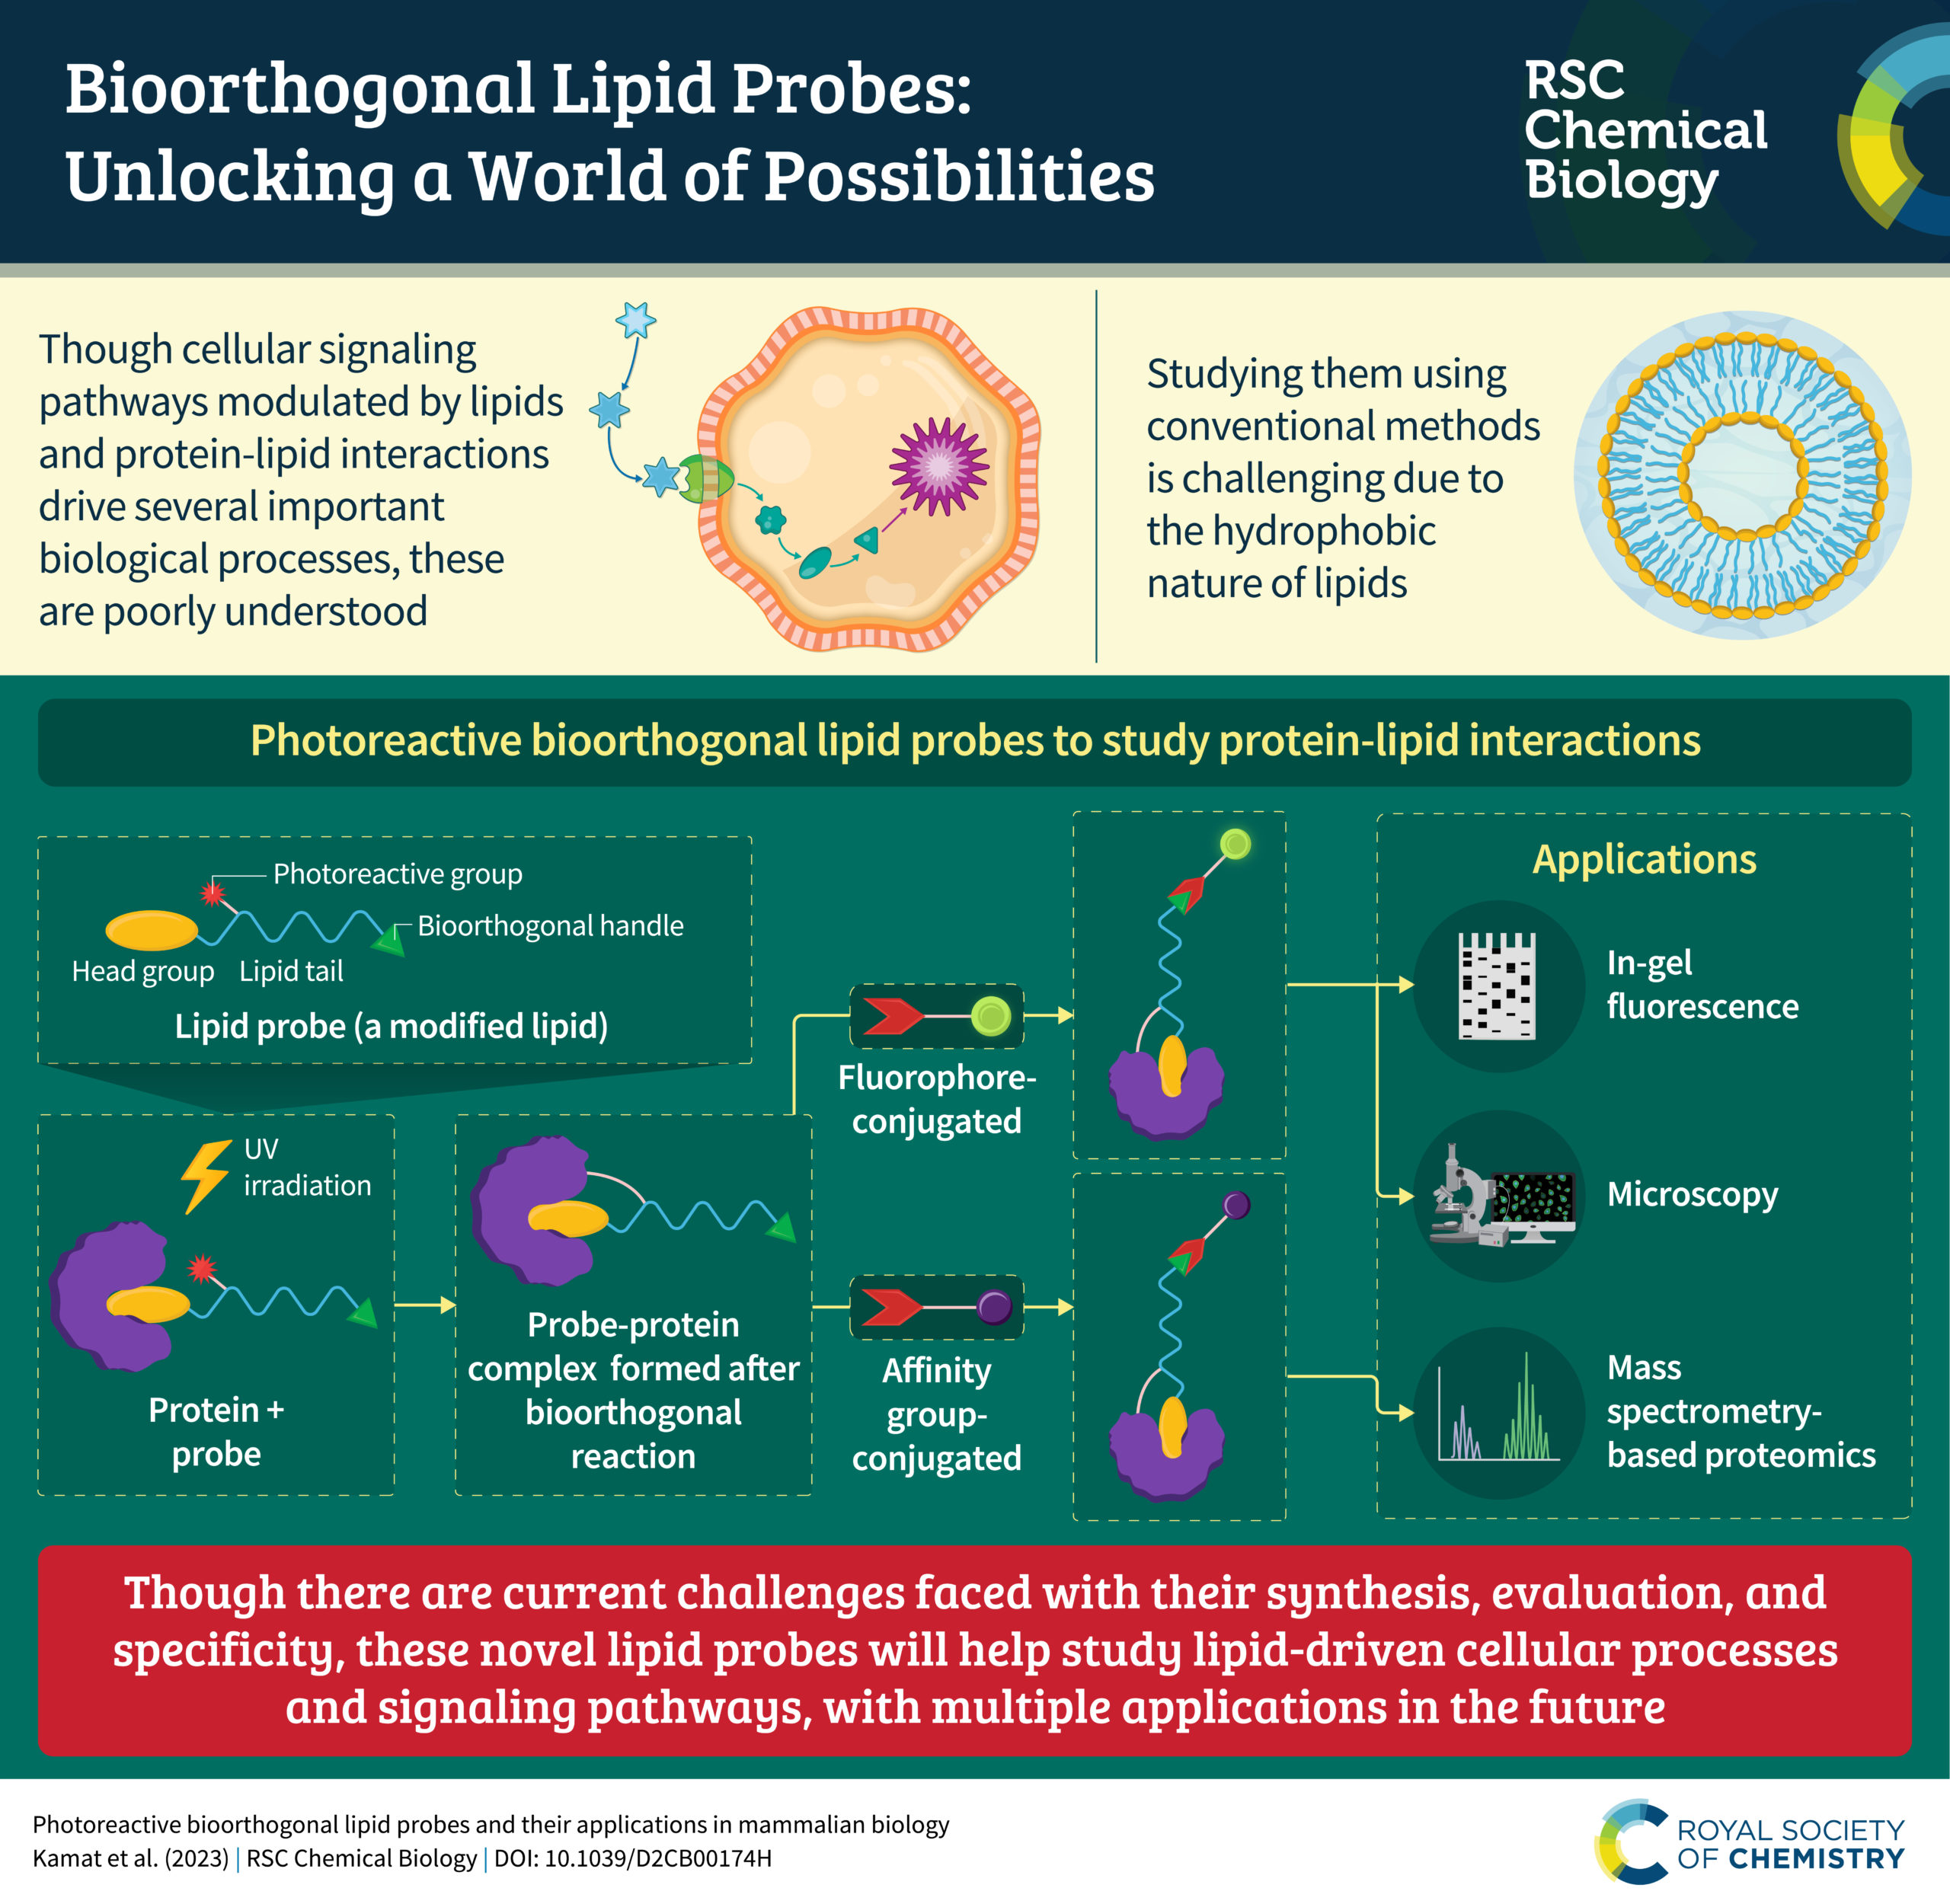 Infographic Bioorthogonal lipid probes: unlocking a world of possibilities by Dr Kamat 